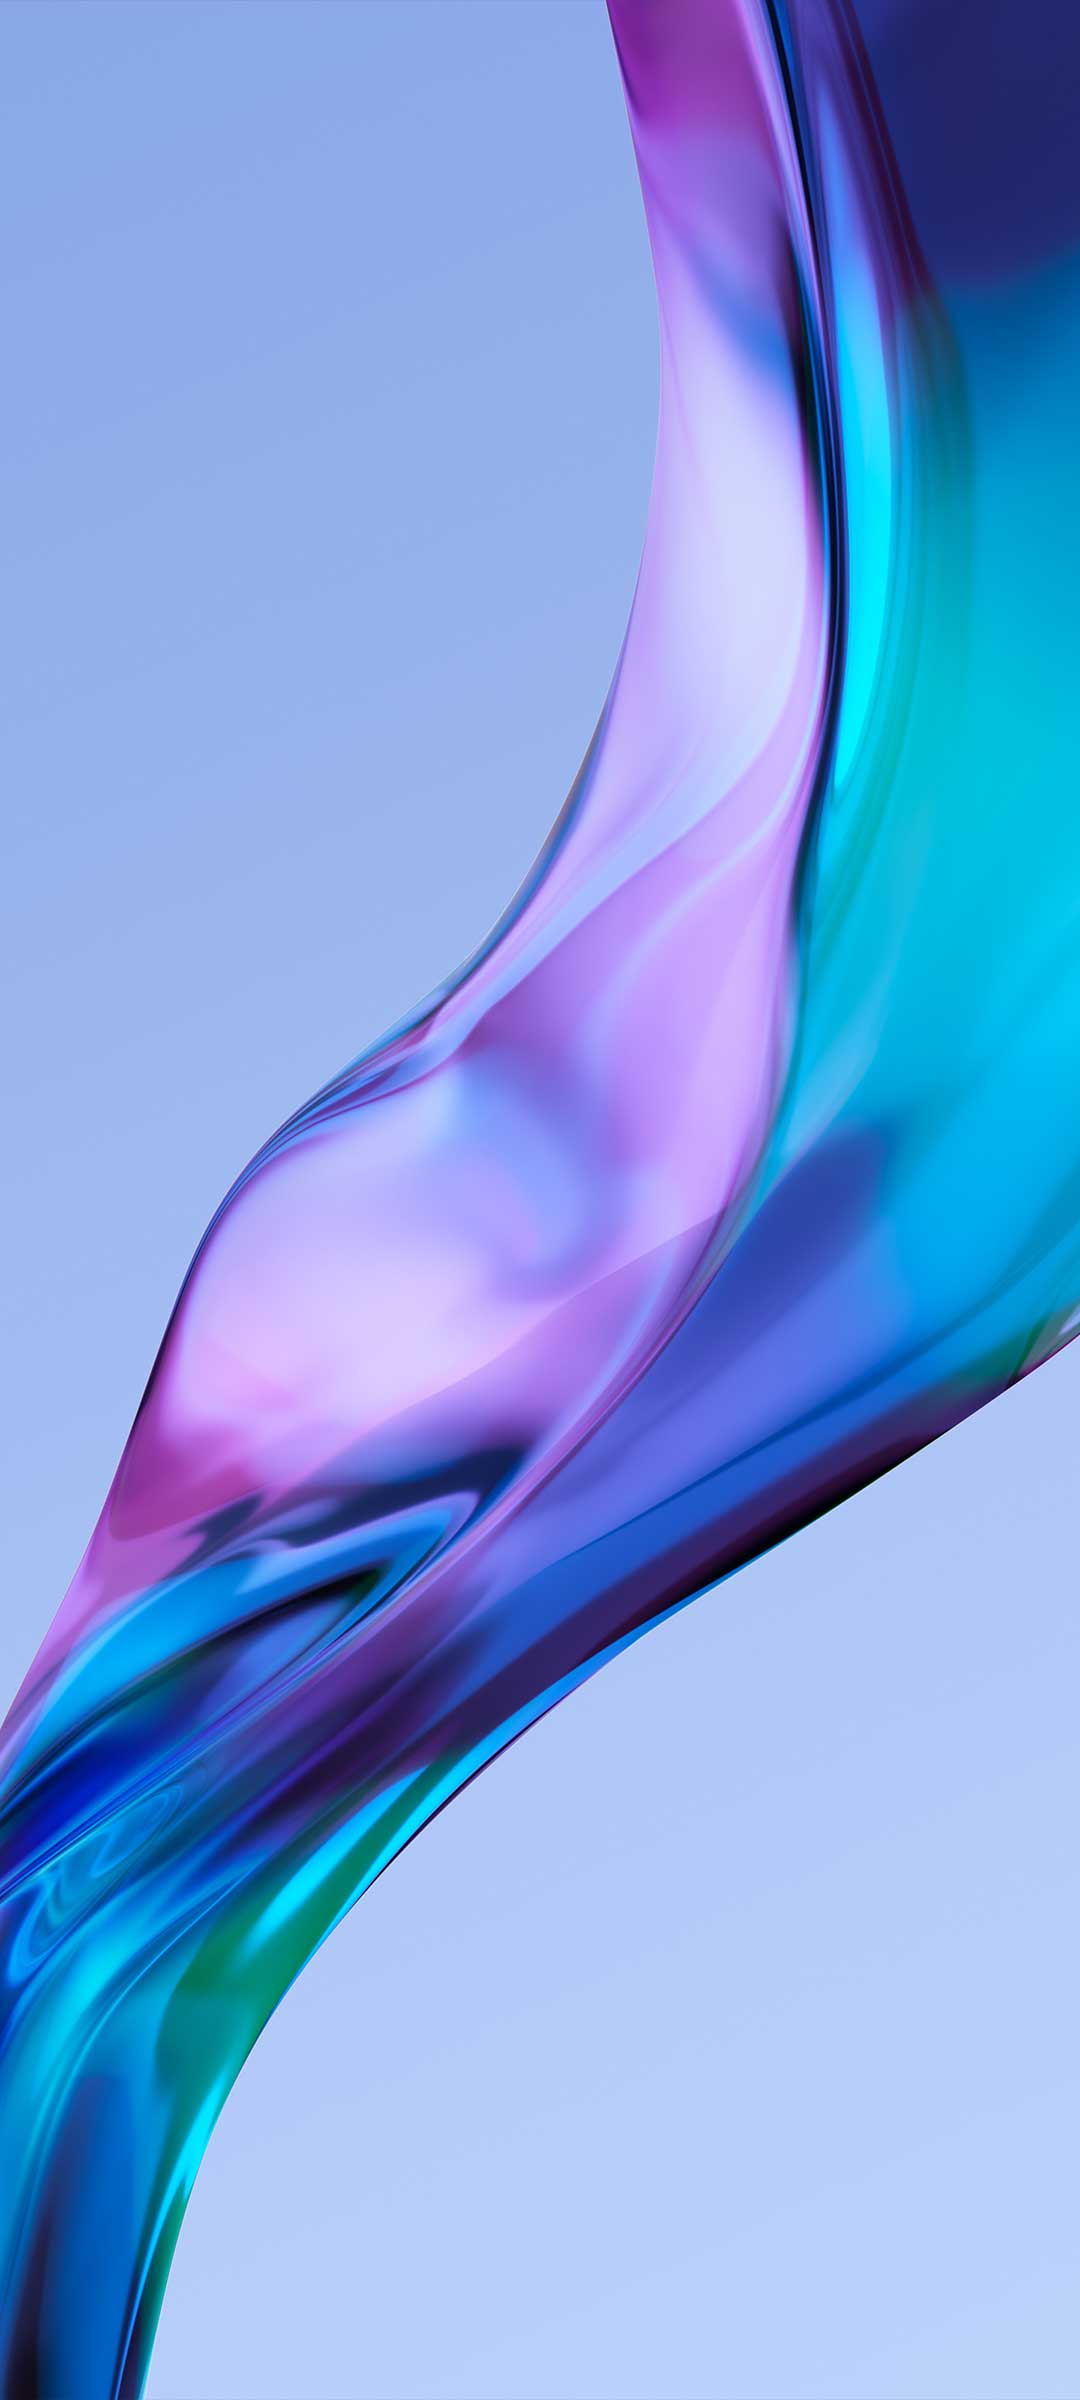 Samsung Galaxy Note 4 HD Wallpapers For Free – Download Here